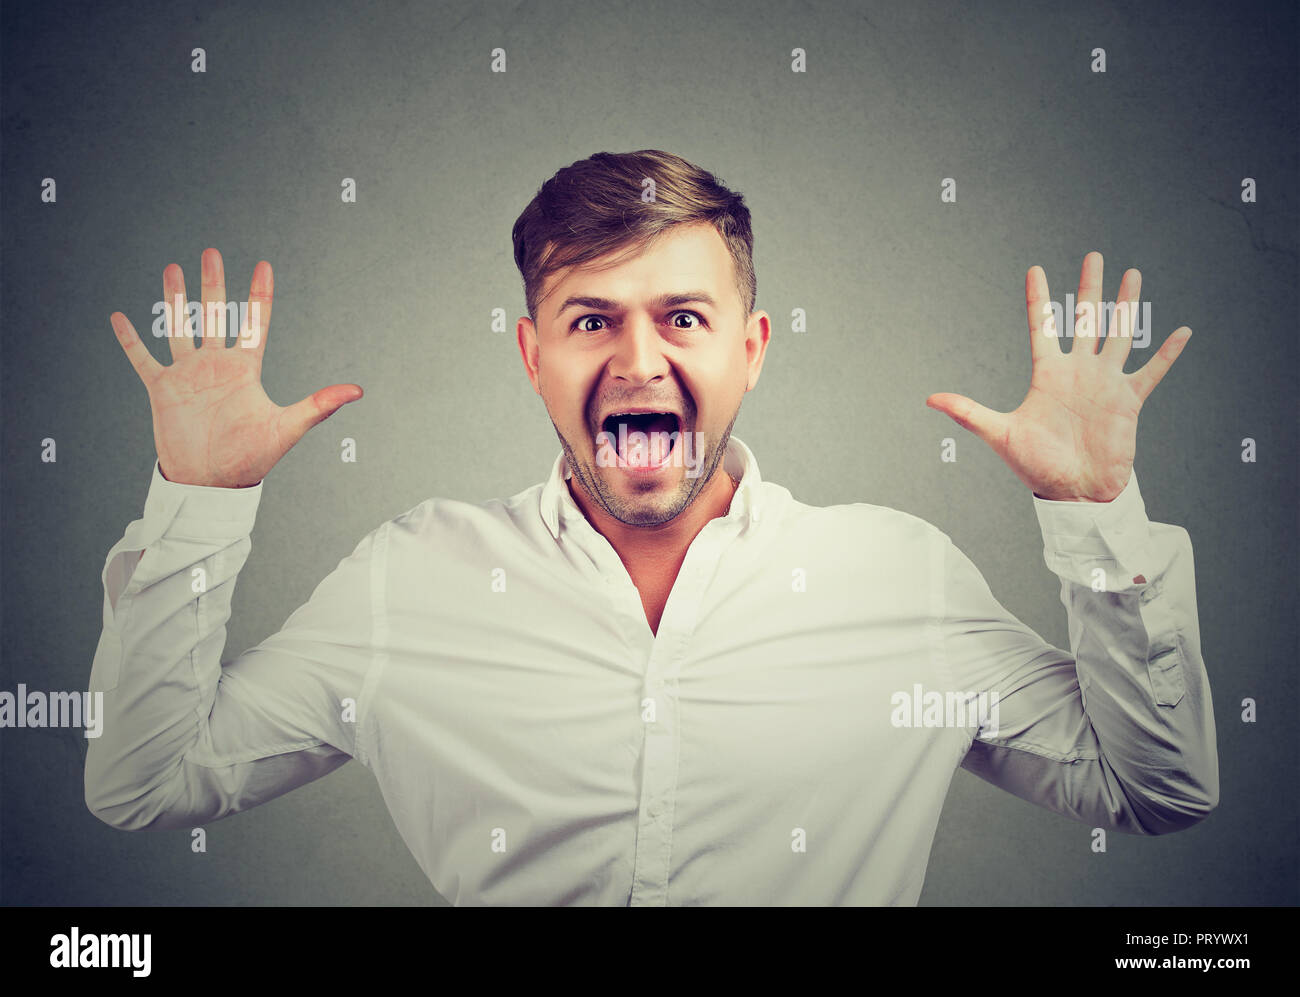 Young man in white shirt looking super impressed and surprised while screaming with hands raised at camera Stock Photo